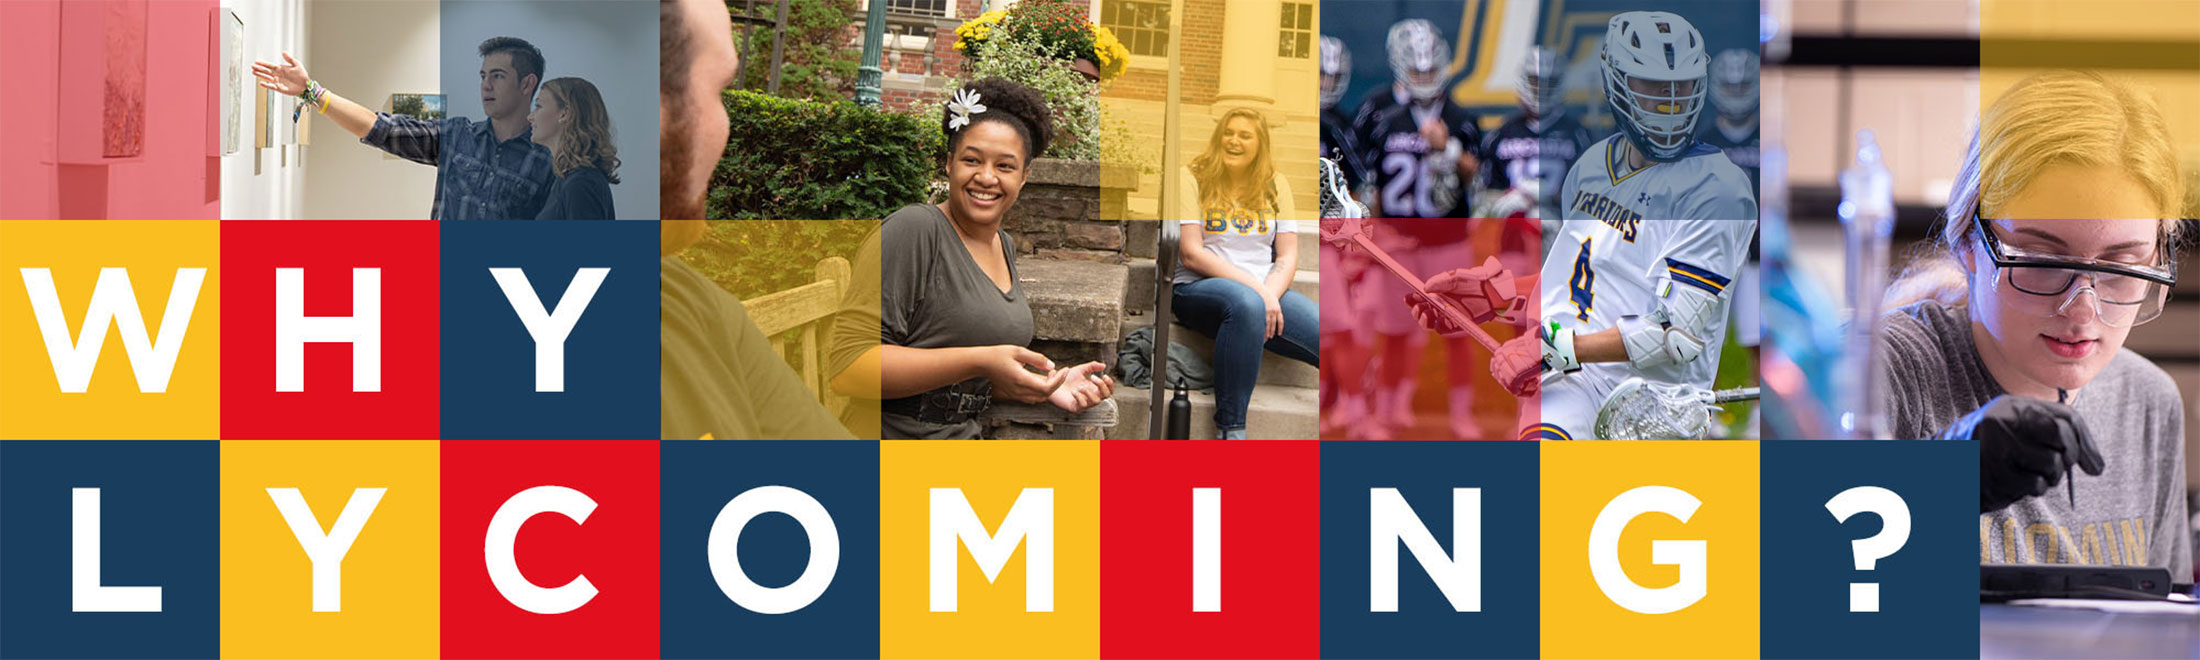 Tiles containing smaller photos of students and campus with large text: Why Lycoming?